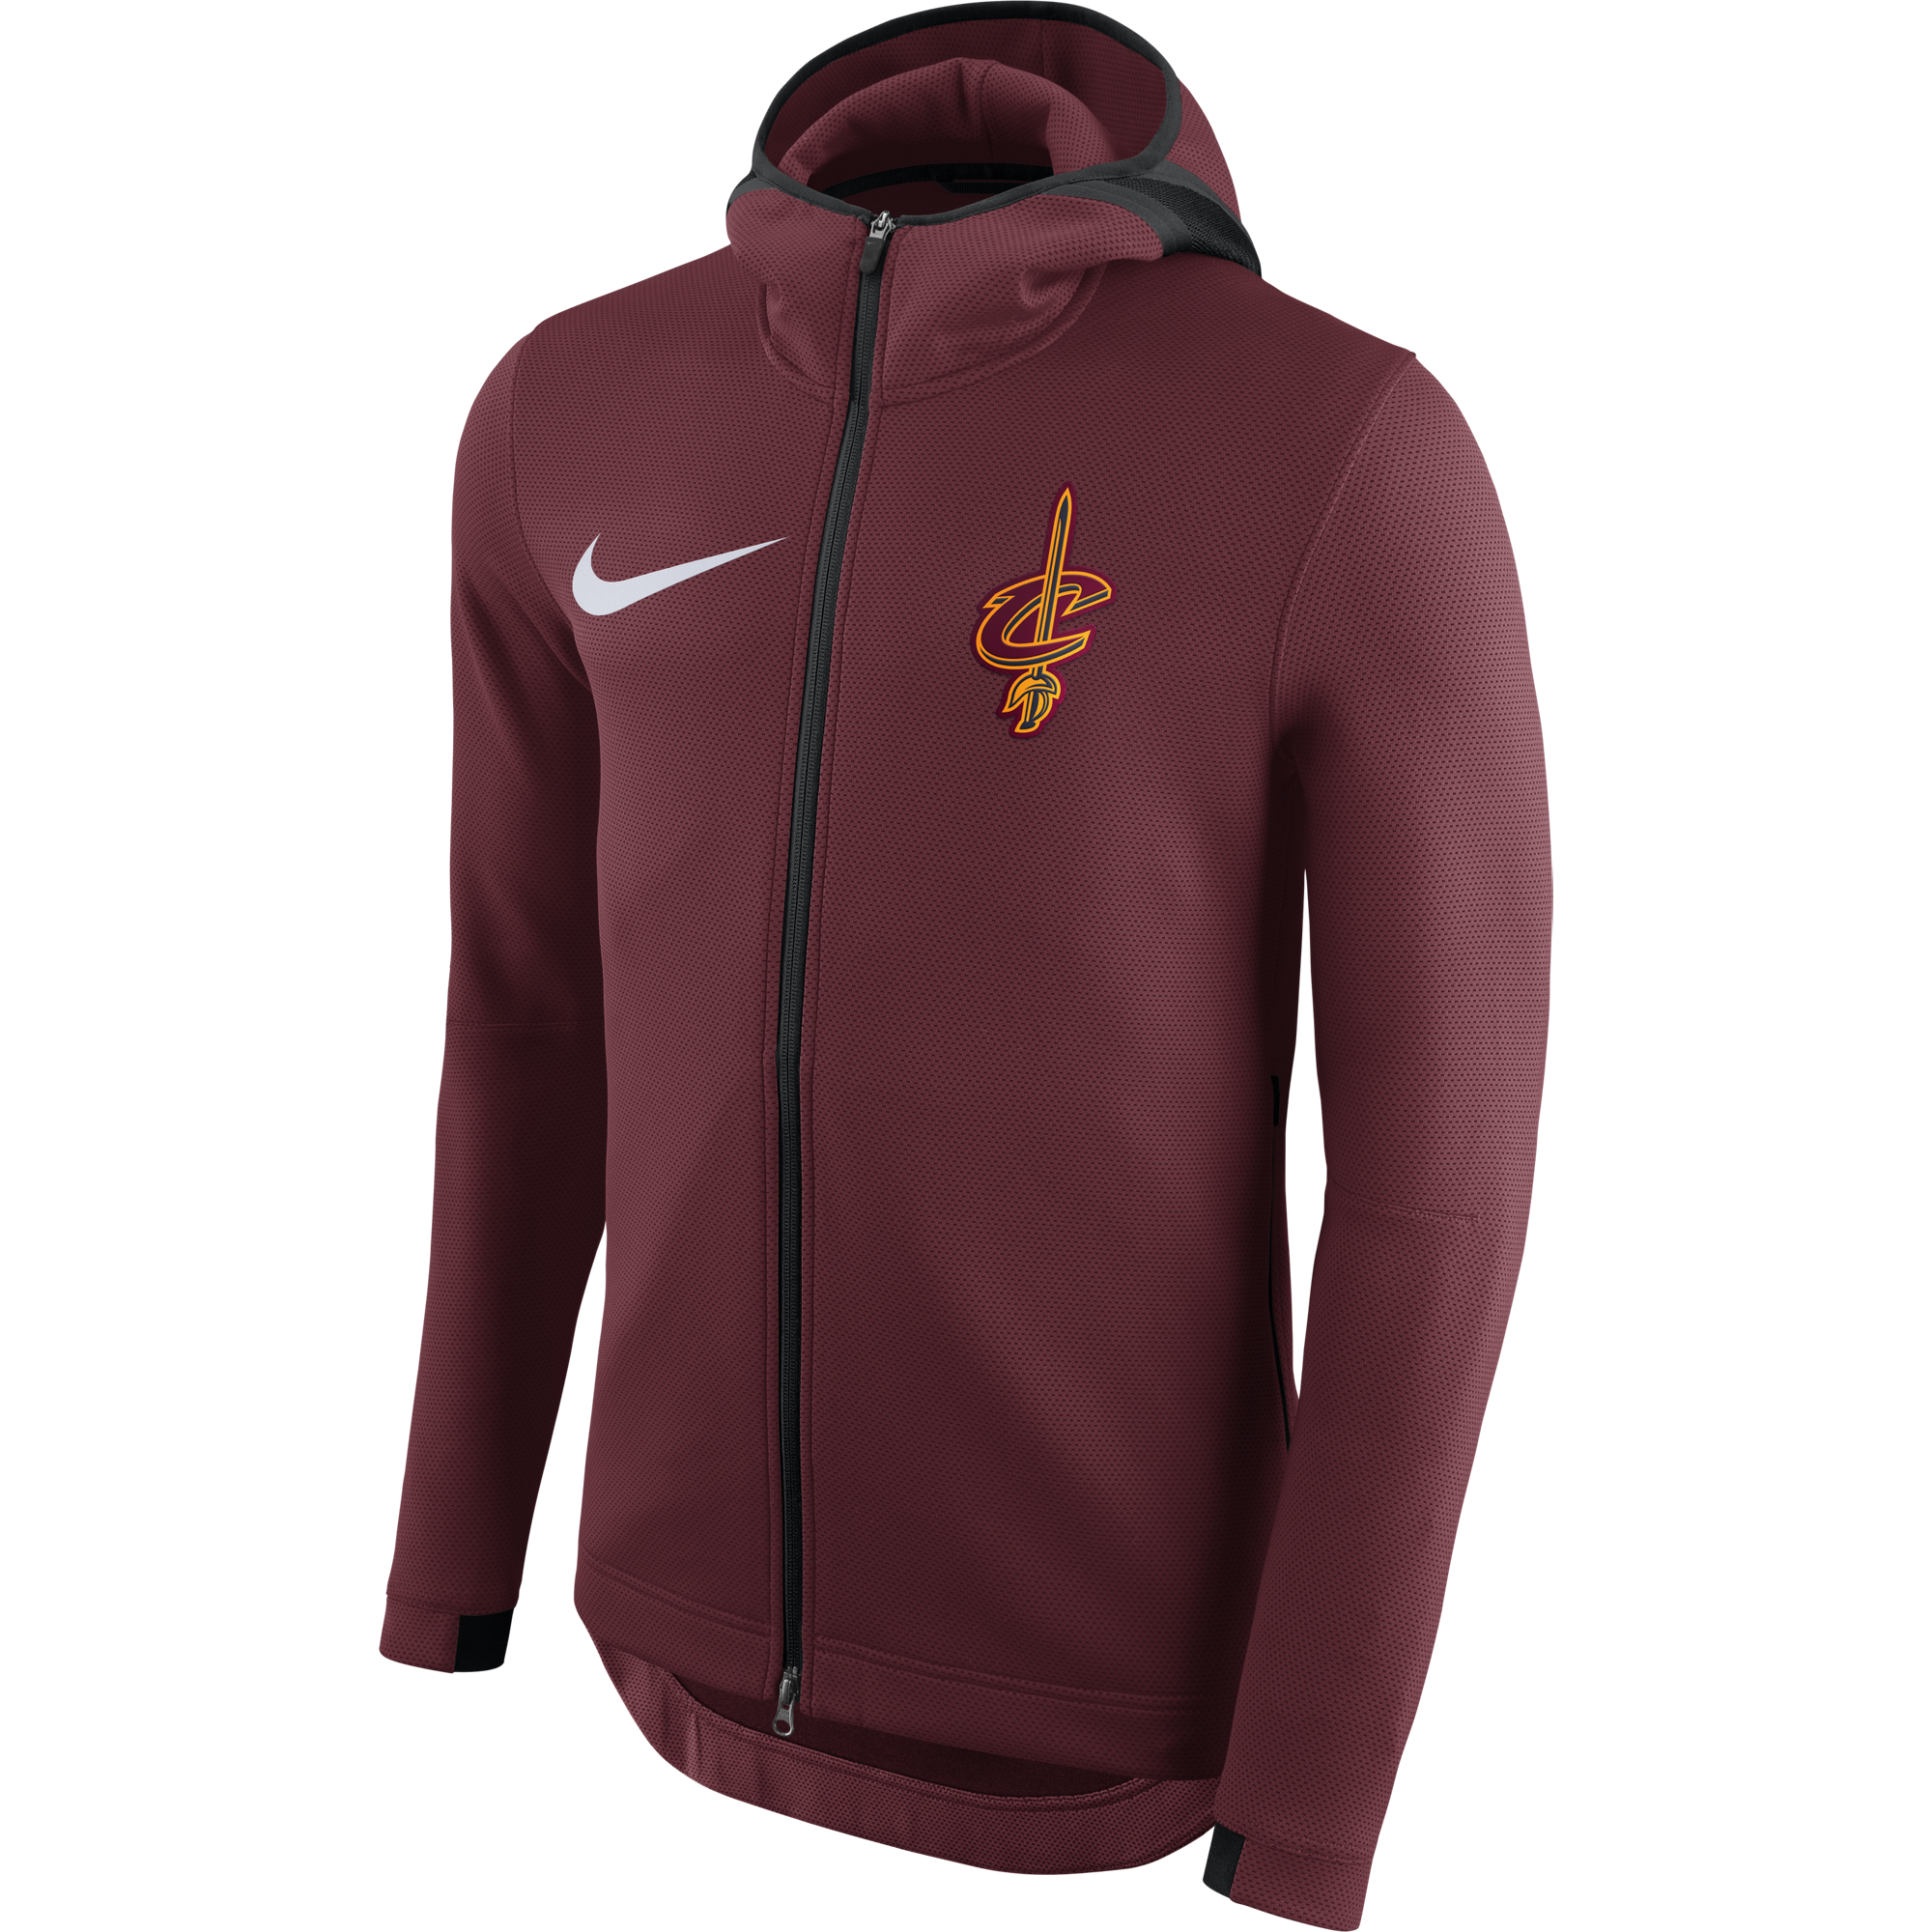 NIKE NBA CLEVELAND CAVALIERS THERMAFLEX SHOWTIME HOODIE TEAM RED